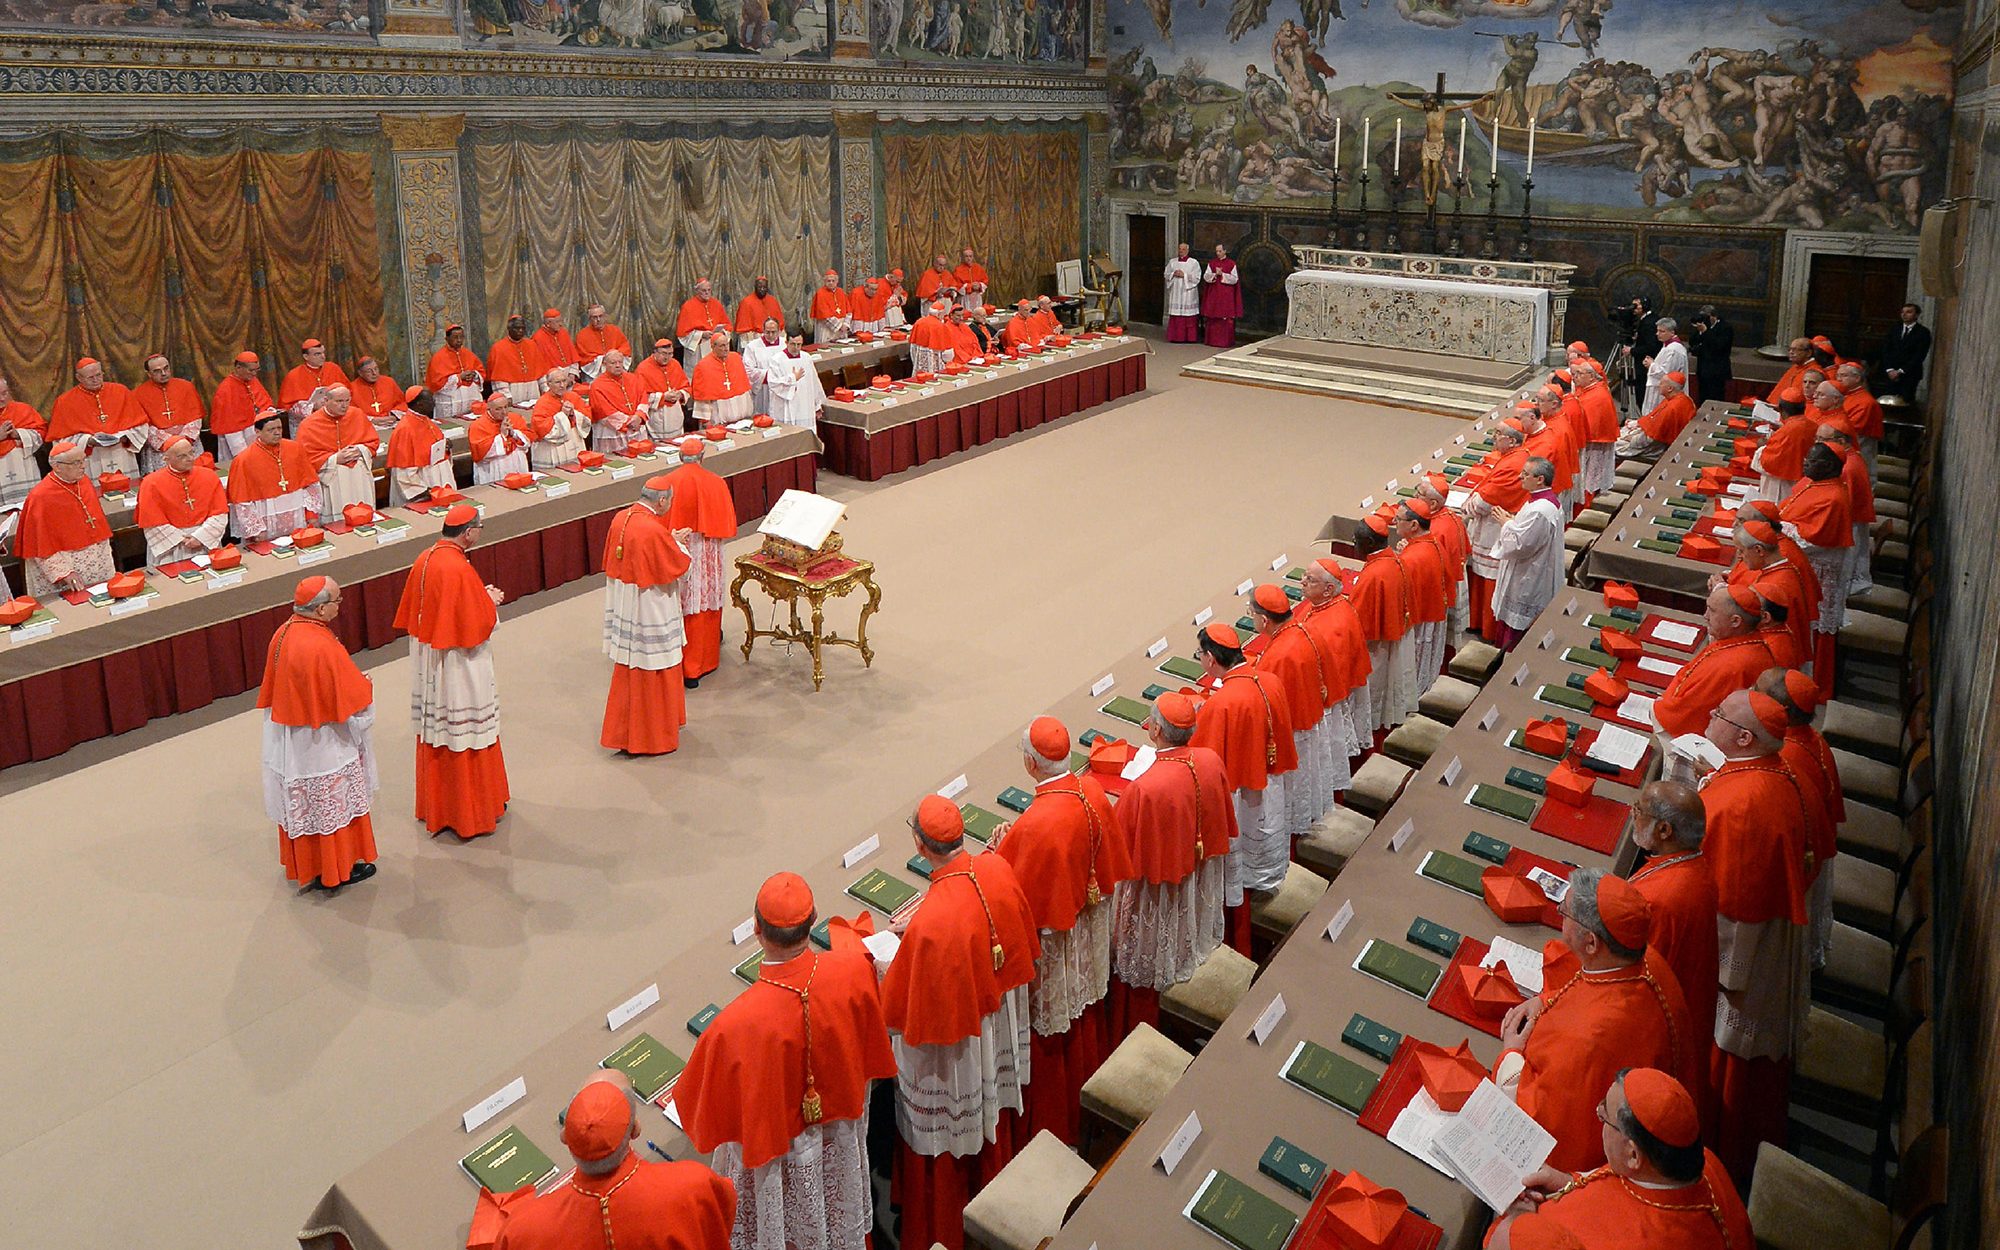 VATICAN-CARDINALS-POPE-CONCLAVE-MARCH-2013-AFP-000_DV1436261-edited.jpg